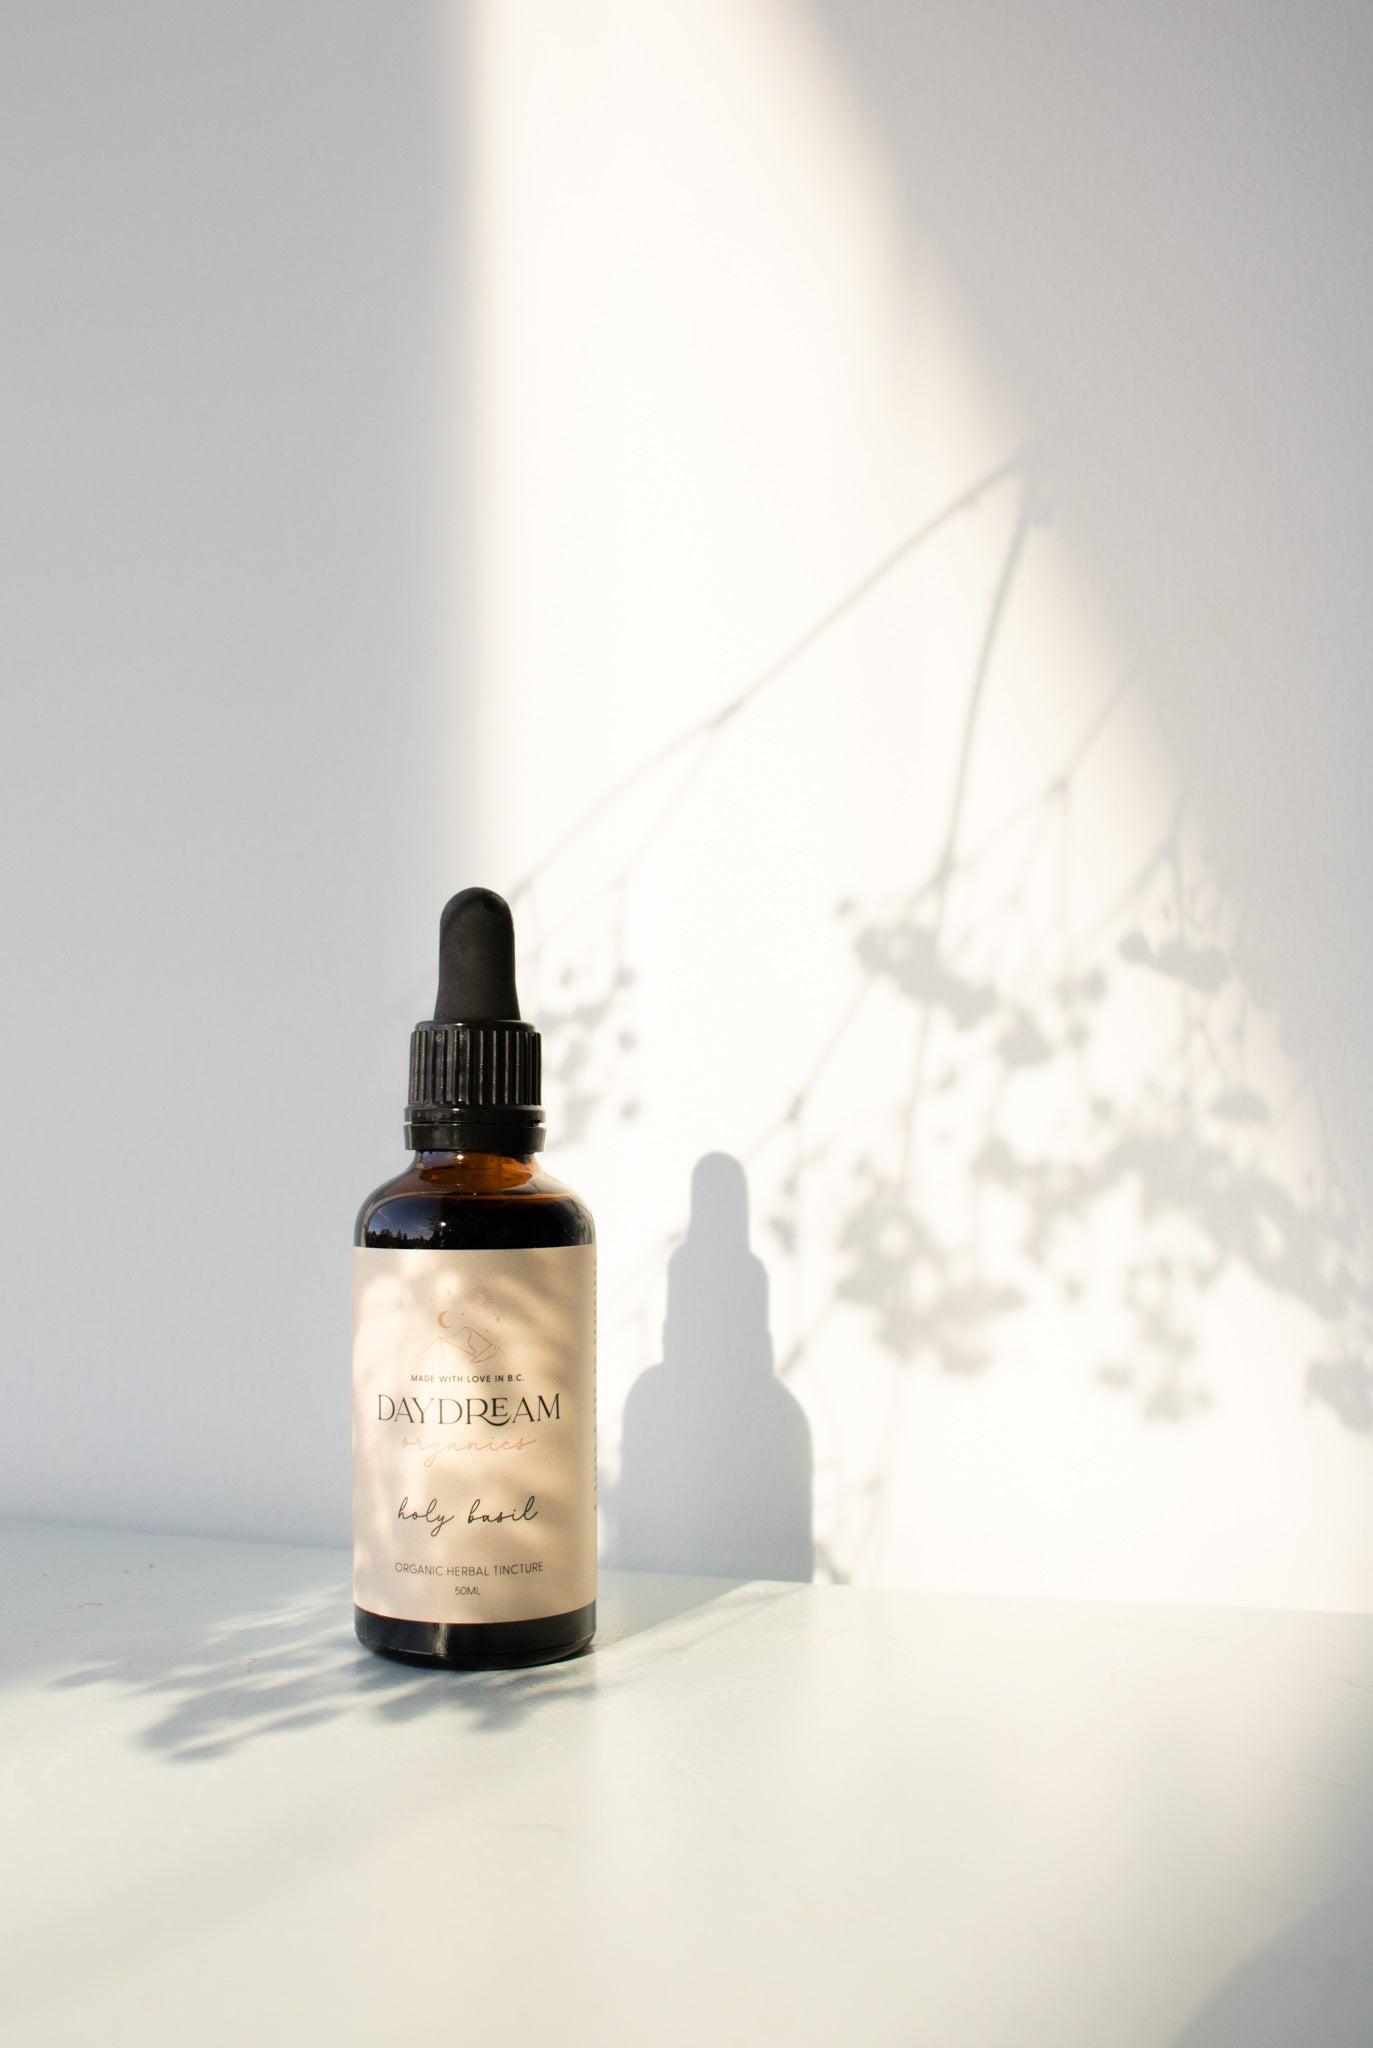 Our Holy Basil herbal tincture (also known as Tulsi) can be used as an adaptogen to help build the body's resistance to stress and has been revered in both Ayurveda and Traditional Chinese Medicine to support a healthy heart and immune system. 